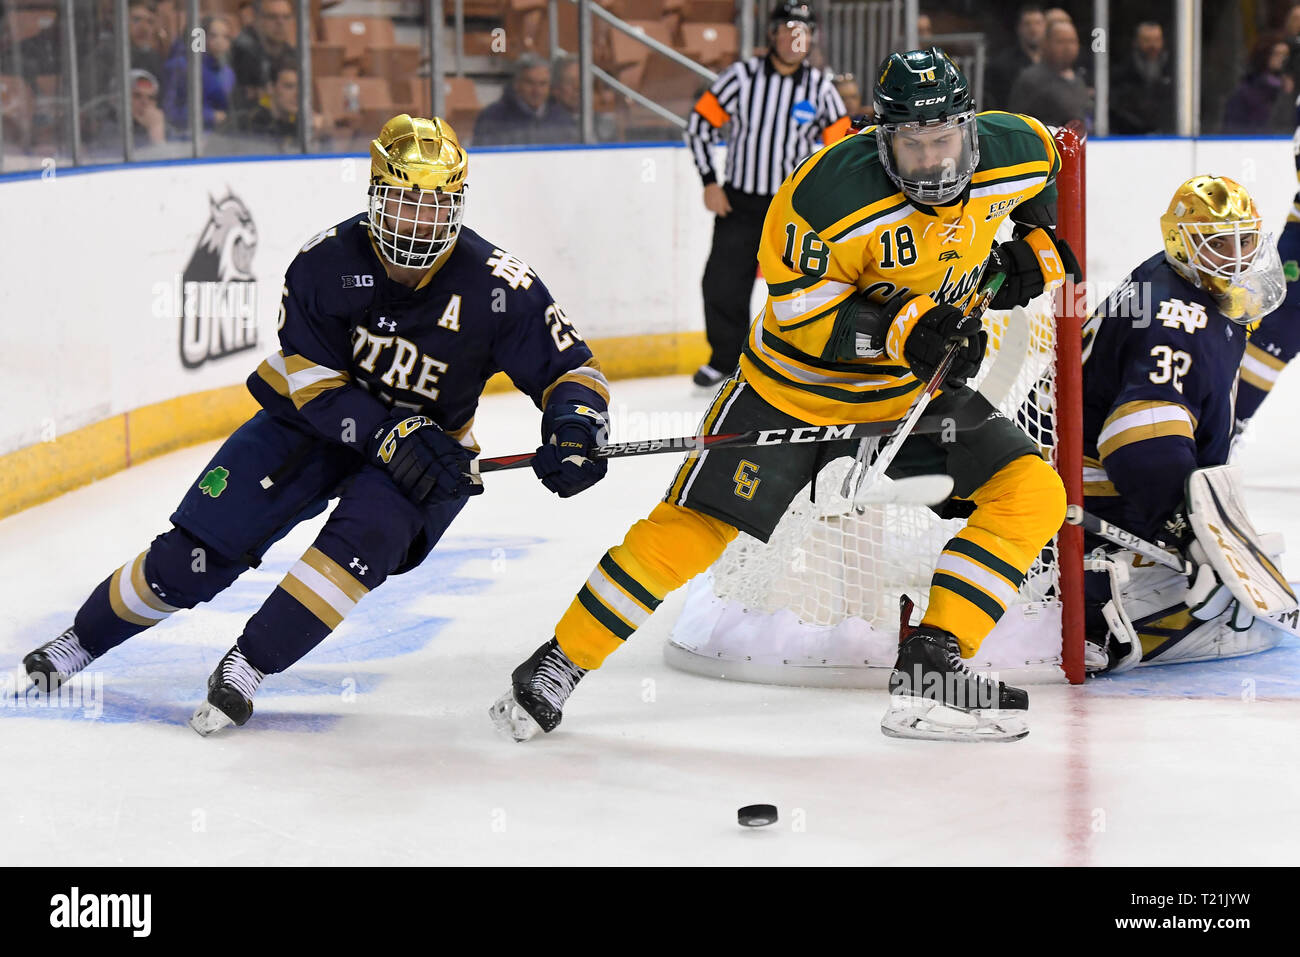 Manchester, New Hampshire, USA. 29th Mar, 2019. Overtime. 29th Mar, 2019. Notre Dame Fighting Irish defenseman Charlie Raith (29) and Clarkson Golden Knights forward Haralds Egle (18) battle for the puck during the NCAA Northeast Regional ice hockey tournament game between the Clarkson Golden Knights and the Notre Dame Fighting Irish held at the SNHU Arena in Manchester NH. Notre Dame defeats Clarkson 3-2 in overtime. Eric Canha/CSM/Alamy Live News Stock Photo